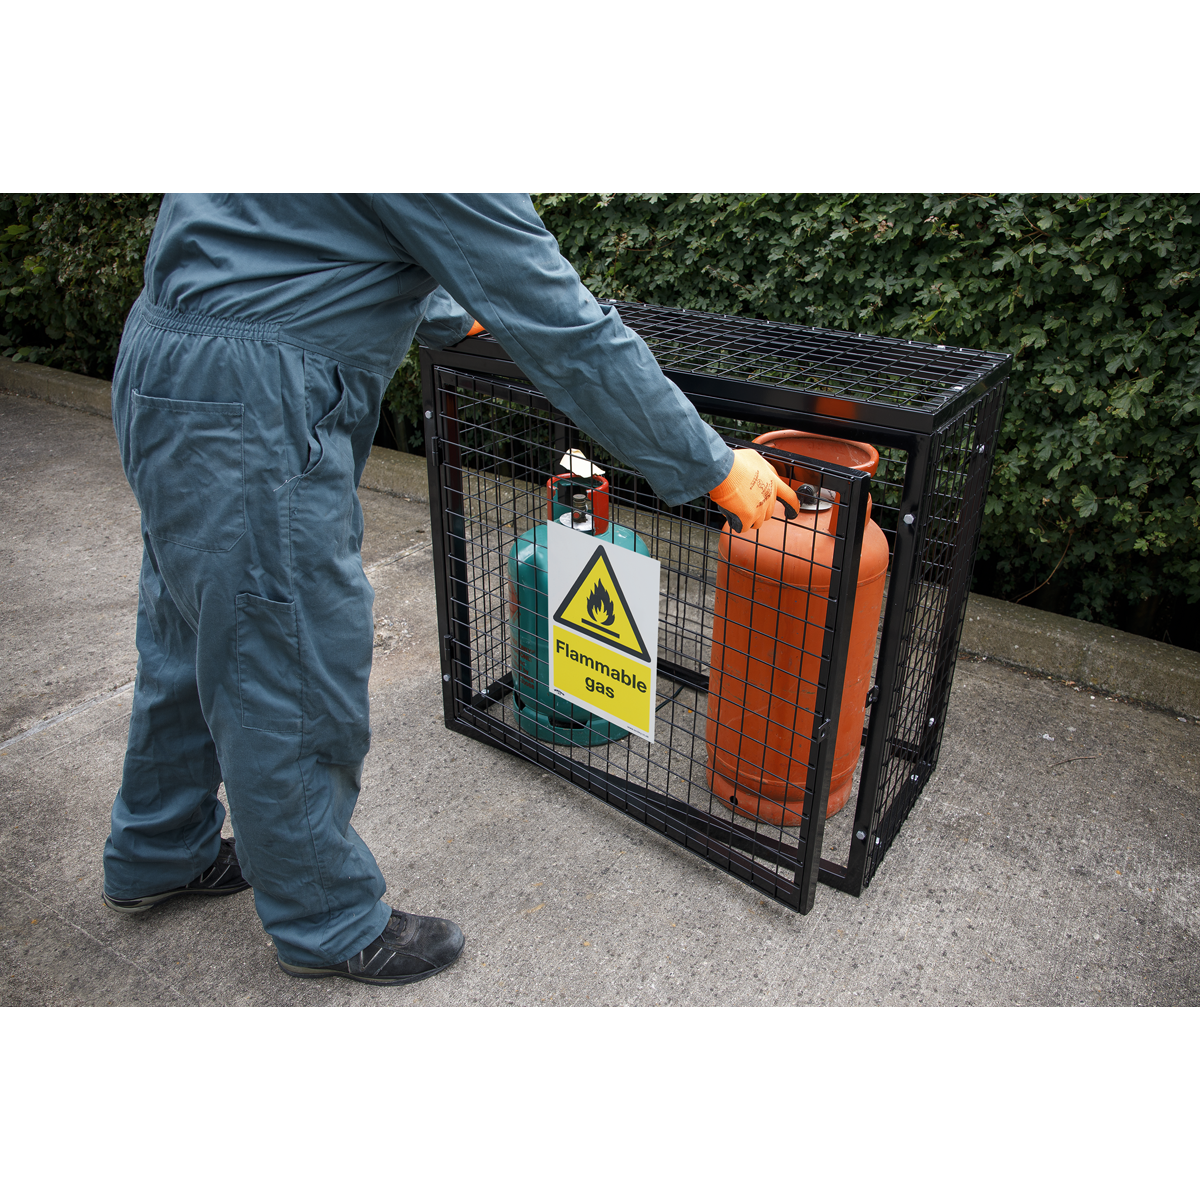 Warning Safety Sign - Flammable Gas - Self-Adhesive Vinyl